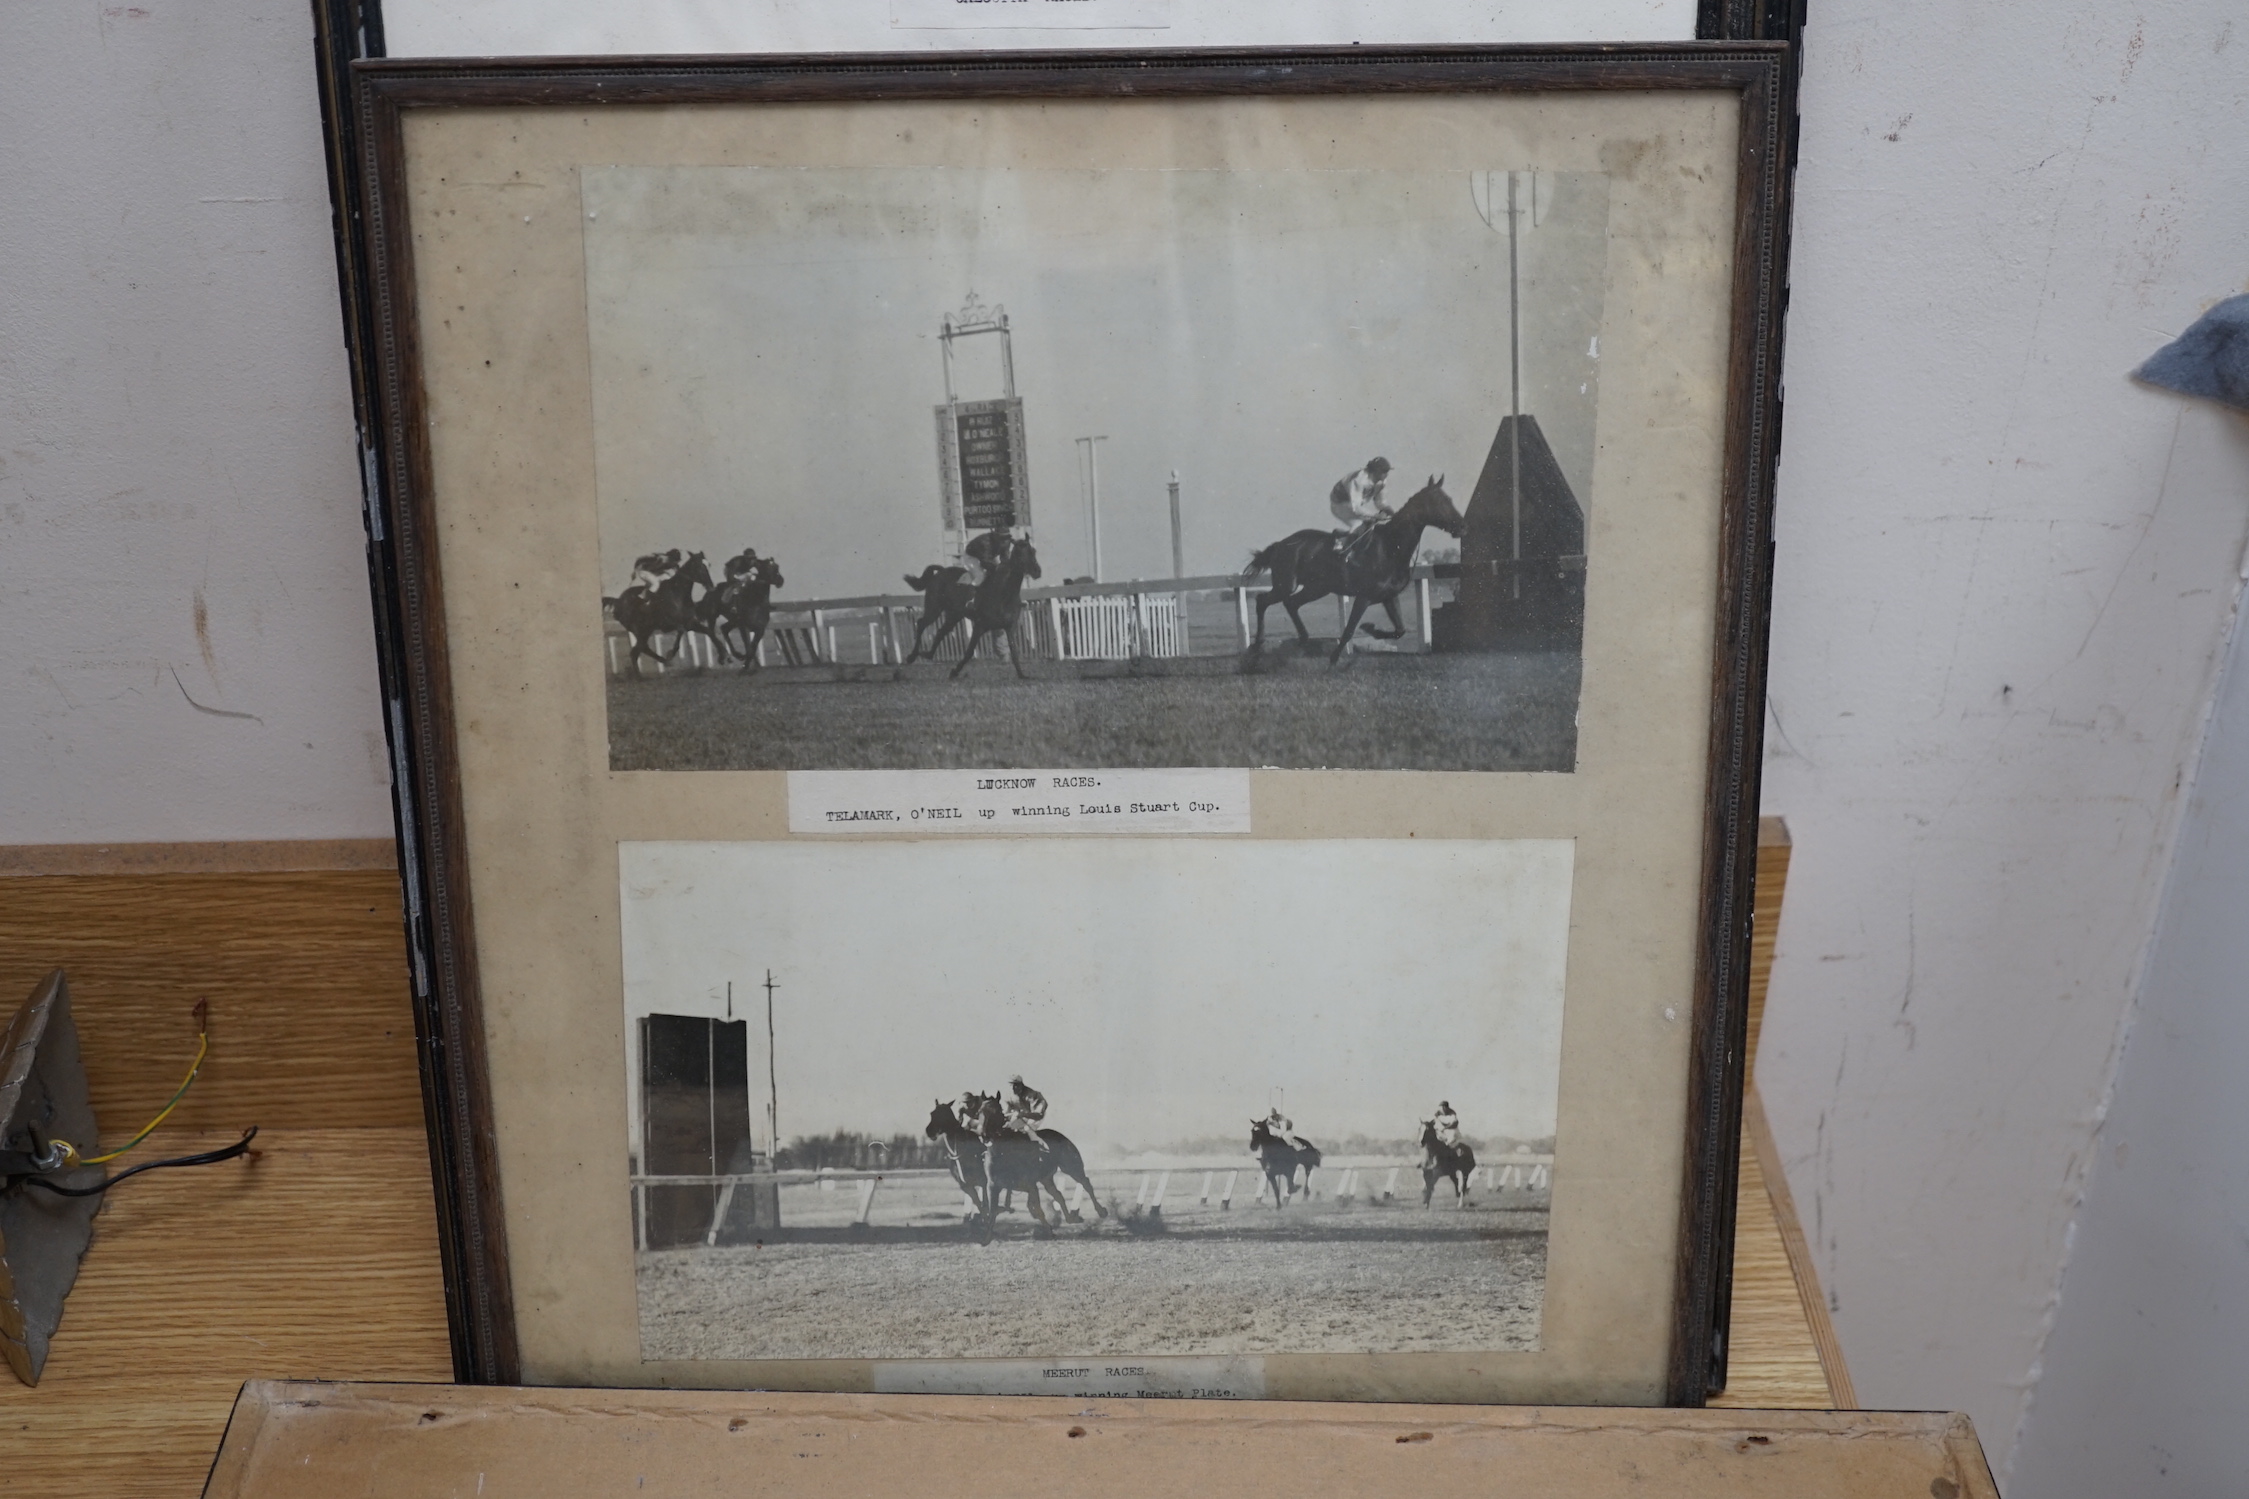 D M & E M Alderson, pair of watercolours, Portraits of racehorses c.1943/48 raced at Calcutta, together with a group of related photographs and ephemera, signed and dated, 38 x 52cm